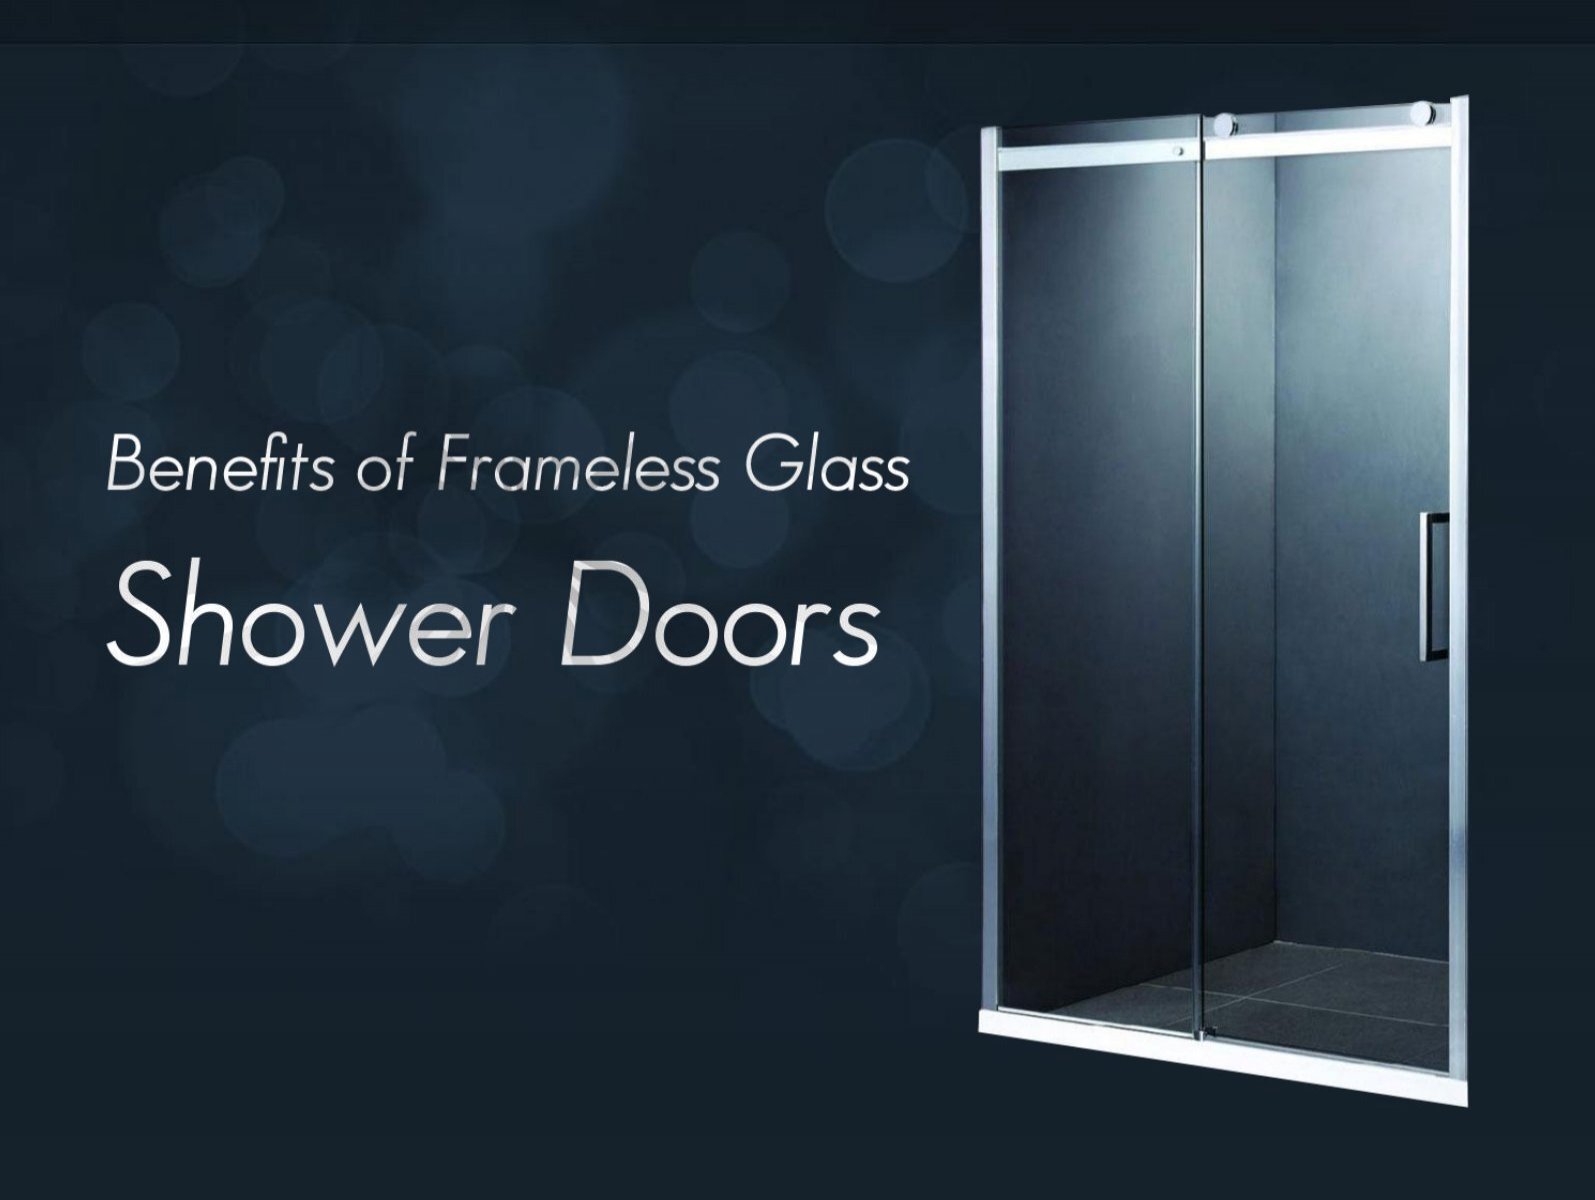 Frameless Shower Doors - Three Benefits for Your Home